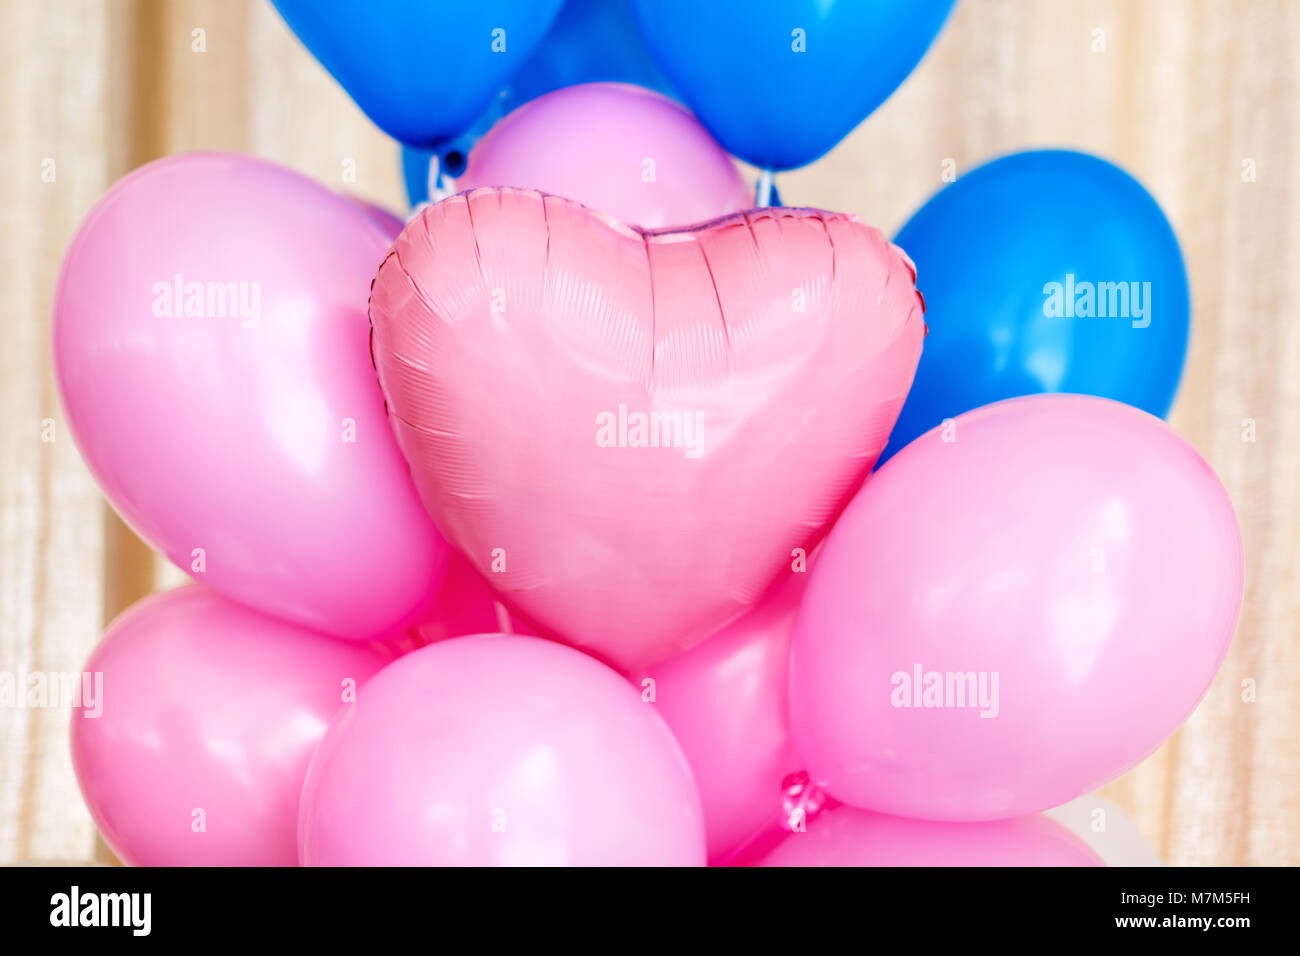 Pink and blue inflatable balloons. Decorations for birthday party. Stock Photo